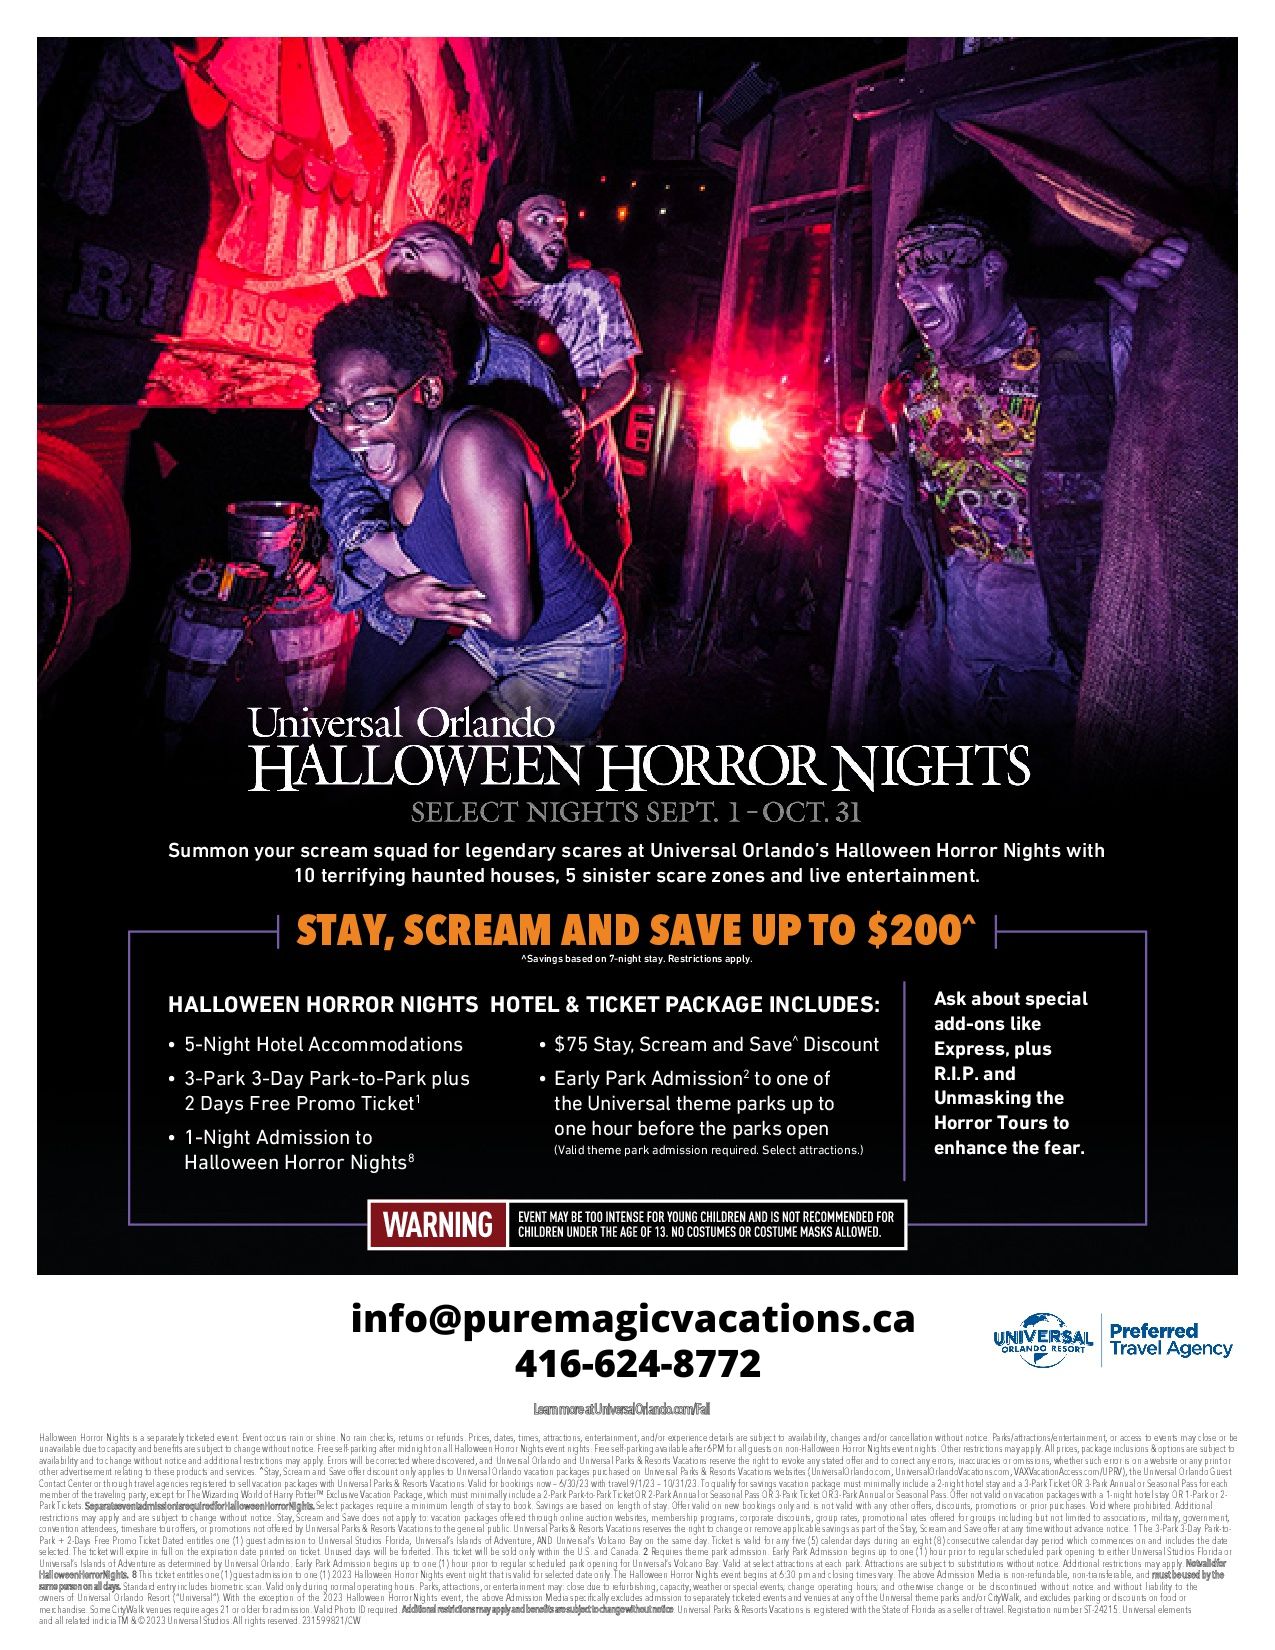 Stay, Scream and Save up to $200 on Universal Orlando Halloween Horror Nights Hotel and Ticket Package